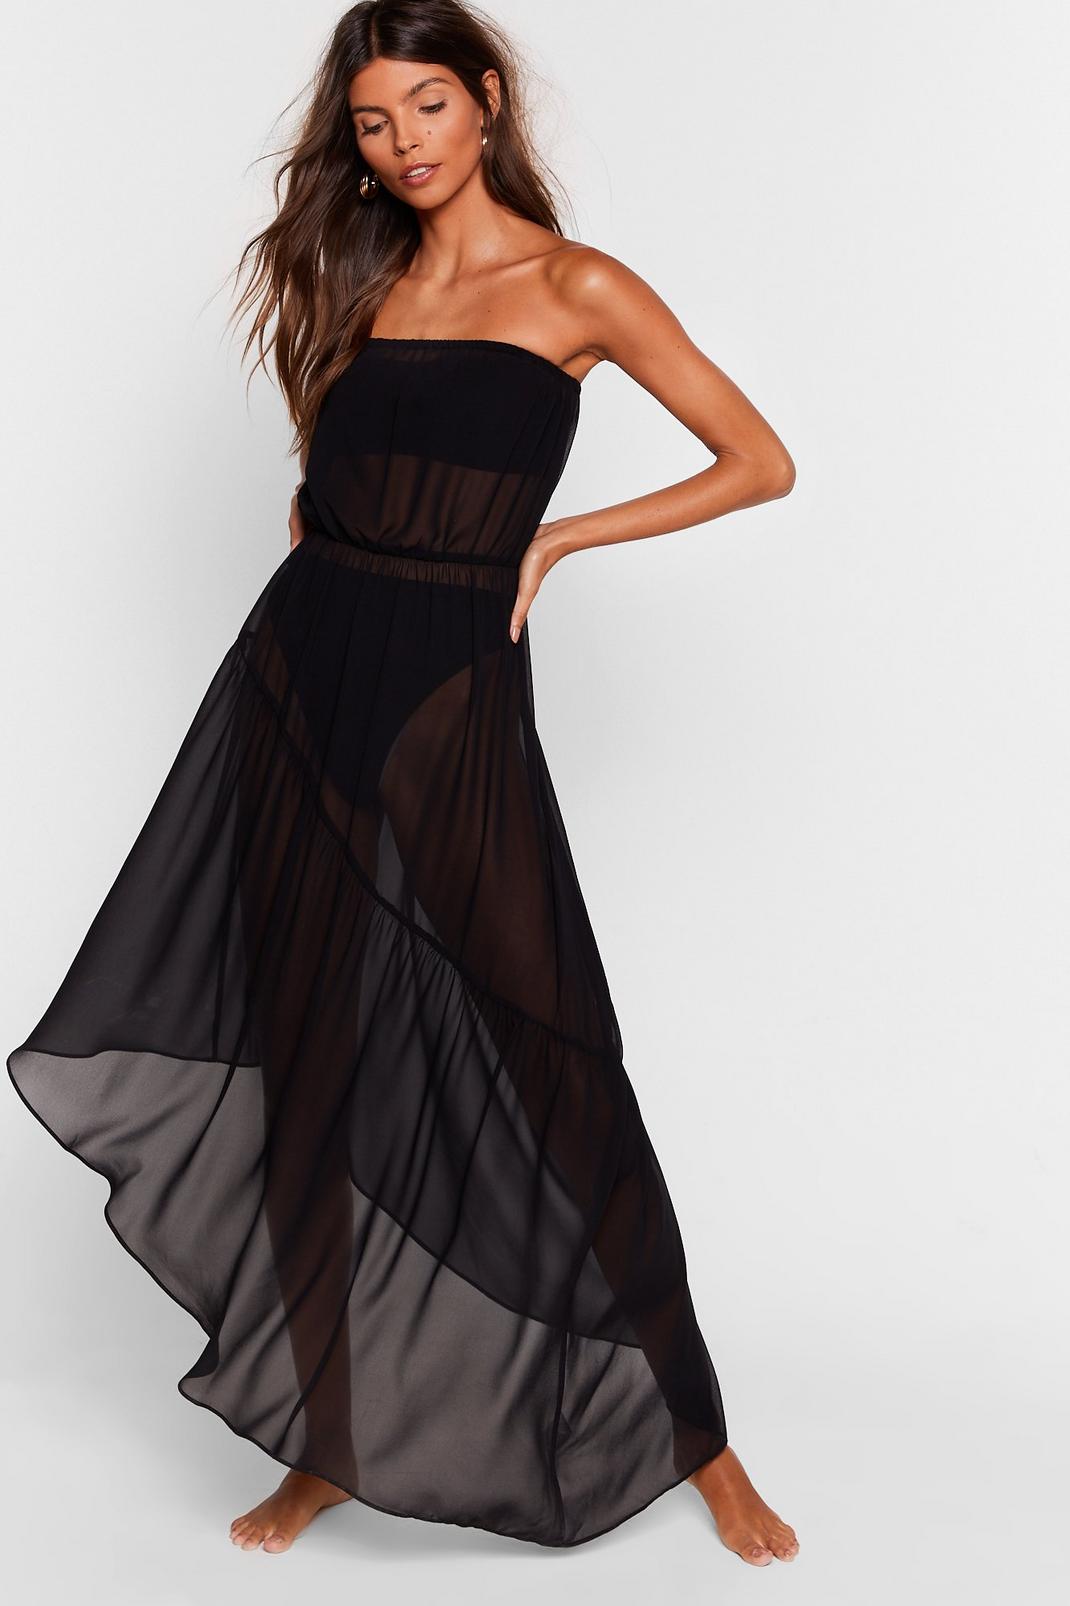 Runnin' in Flow Motion Strapless Cover-Up Dress image number 1